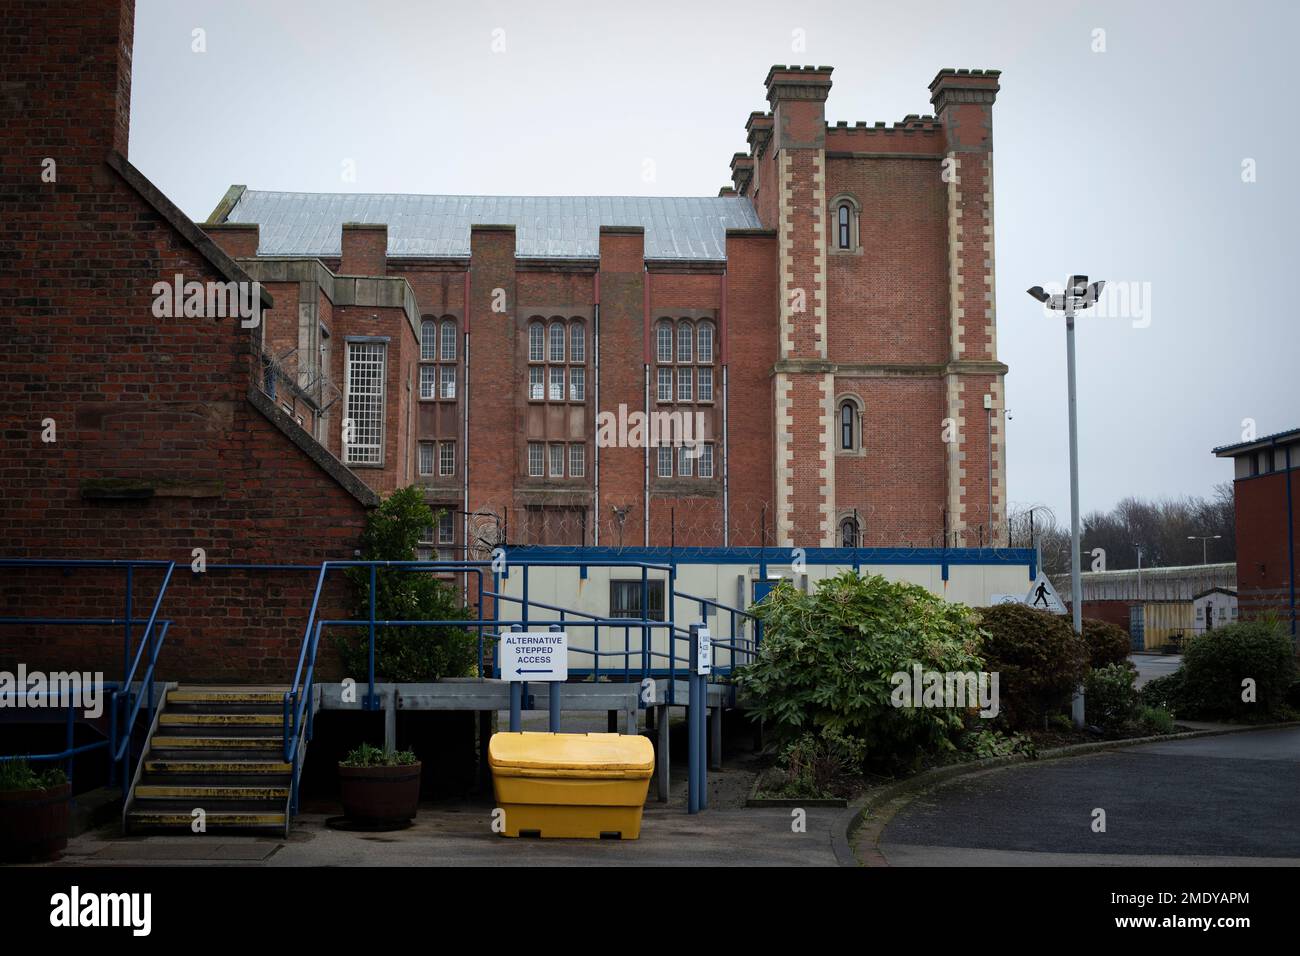 An exterior view of buildings within the precincts of HMP Liverpool, also known as Walton Prison. The prison was given a scathing report in 2017 which pointed out various failings and problems. Present governor Pia Sinha was appointed in that year and in the next two years she turned the prison around with a programme of improvements and support for inmates and infrastructure. HMP Liverpool houses a maximum of 700 prisoners with an overall staff of around 250. Stock Photo